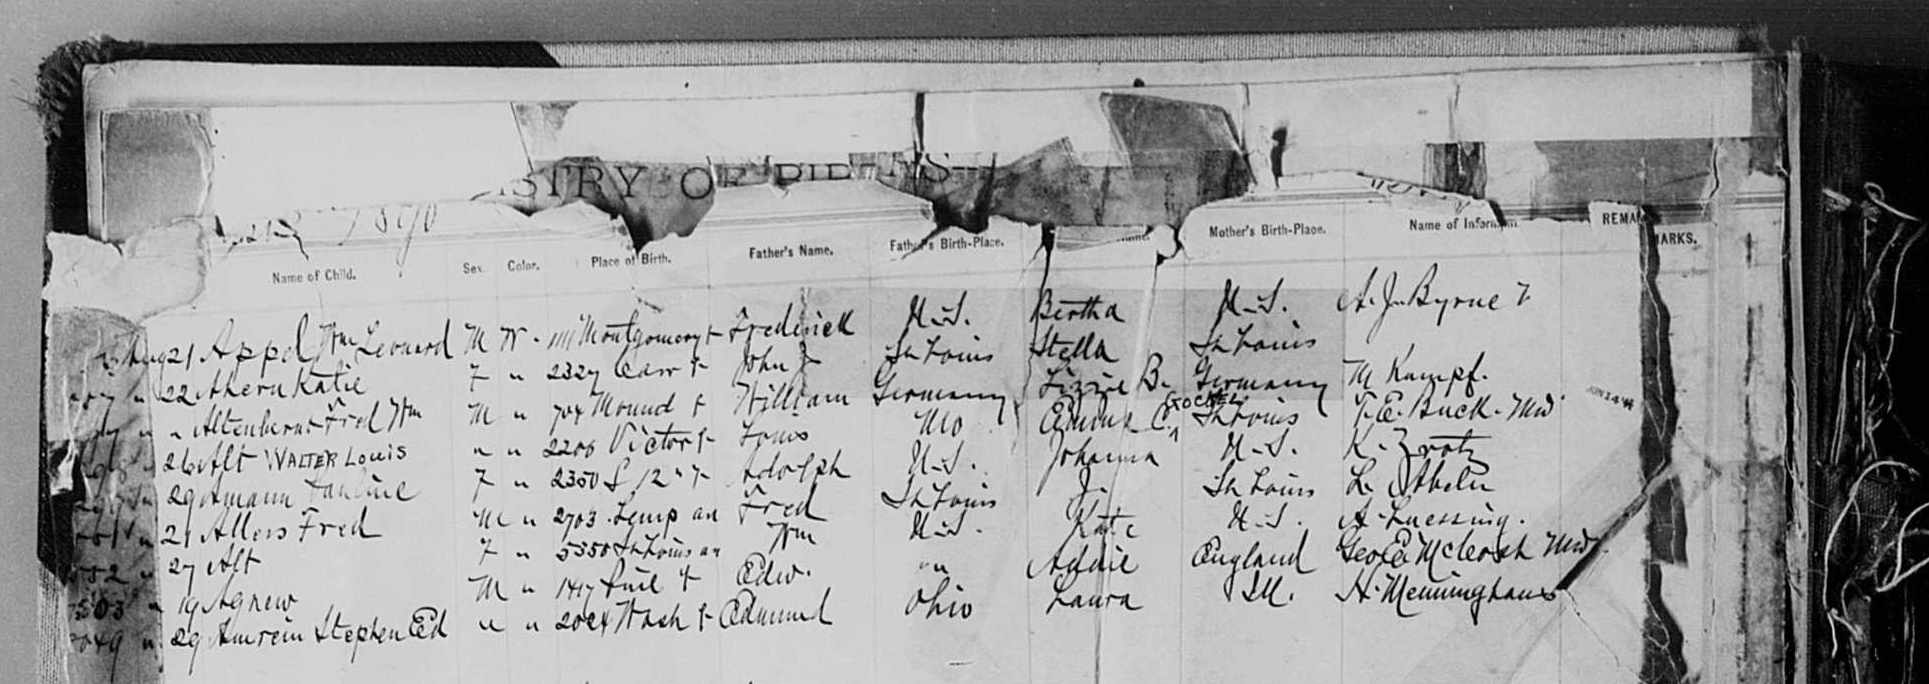 Fred Wm Altenbernd’s birth record, showing his parents William, and Lizzie B.